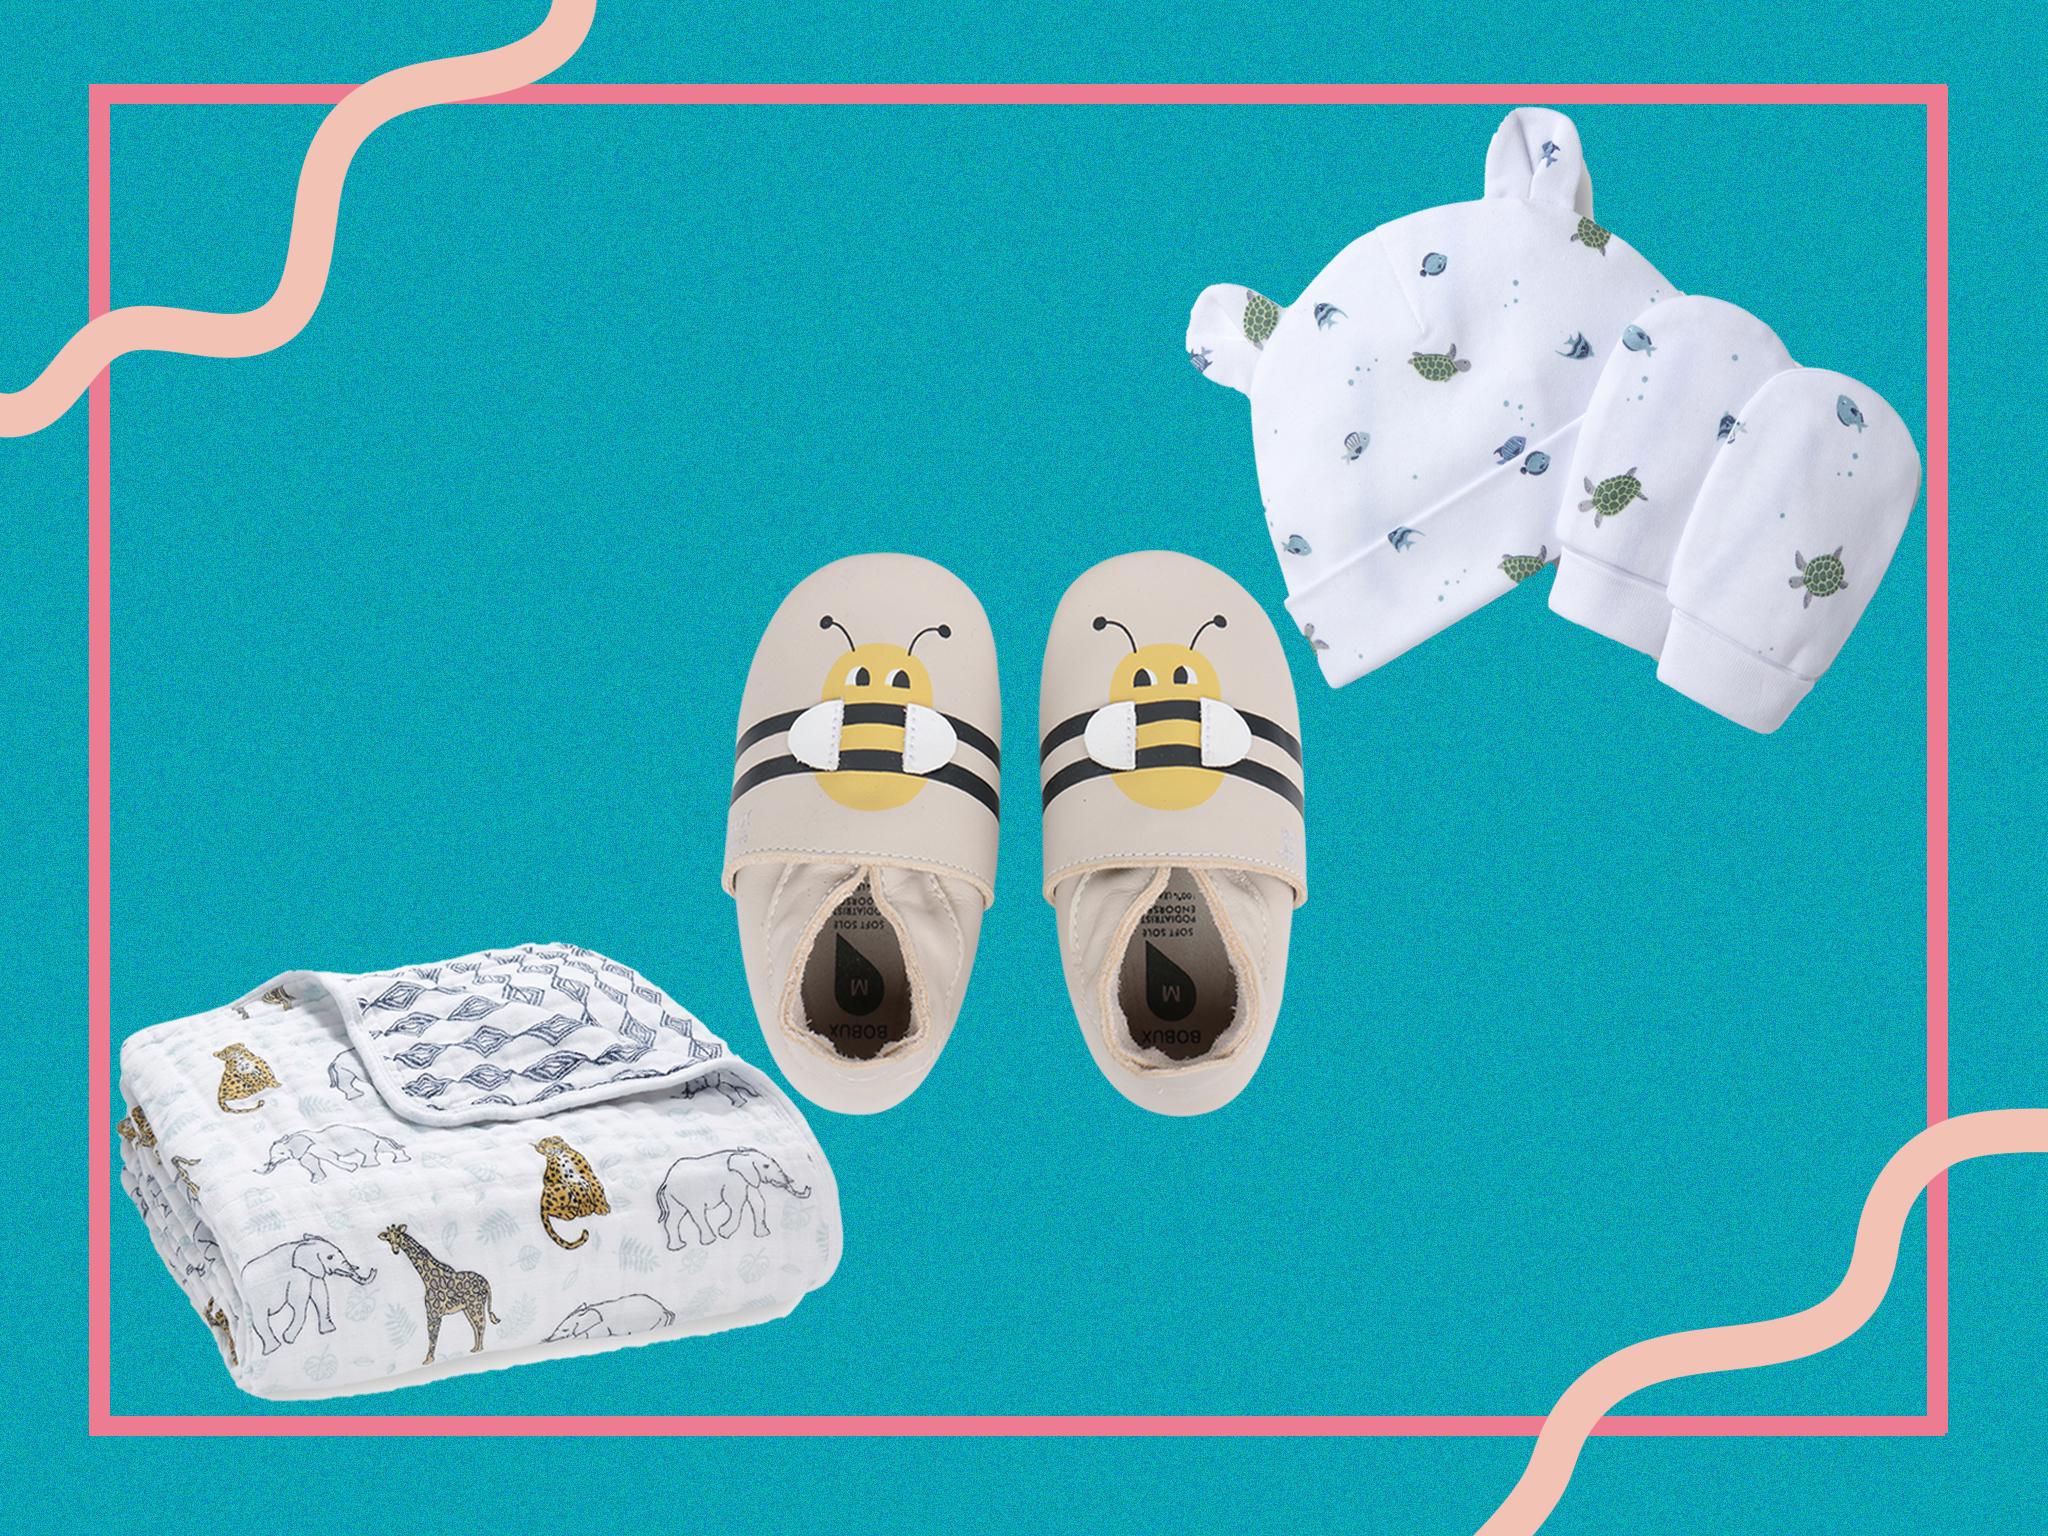 Best baby shower gifts 2020: Presents 